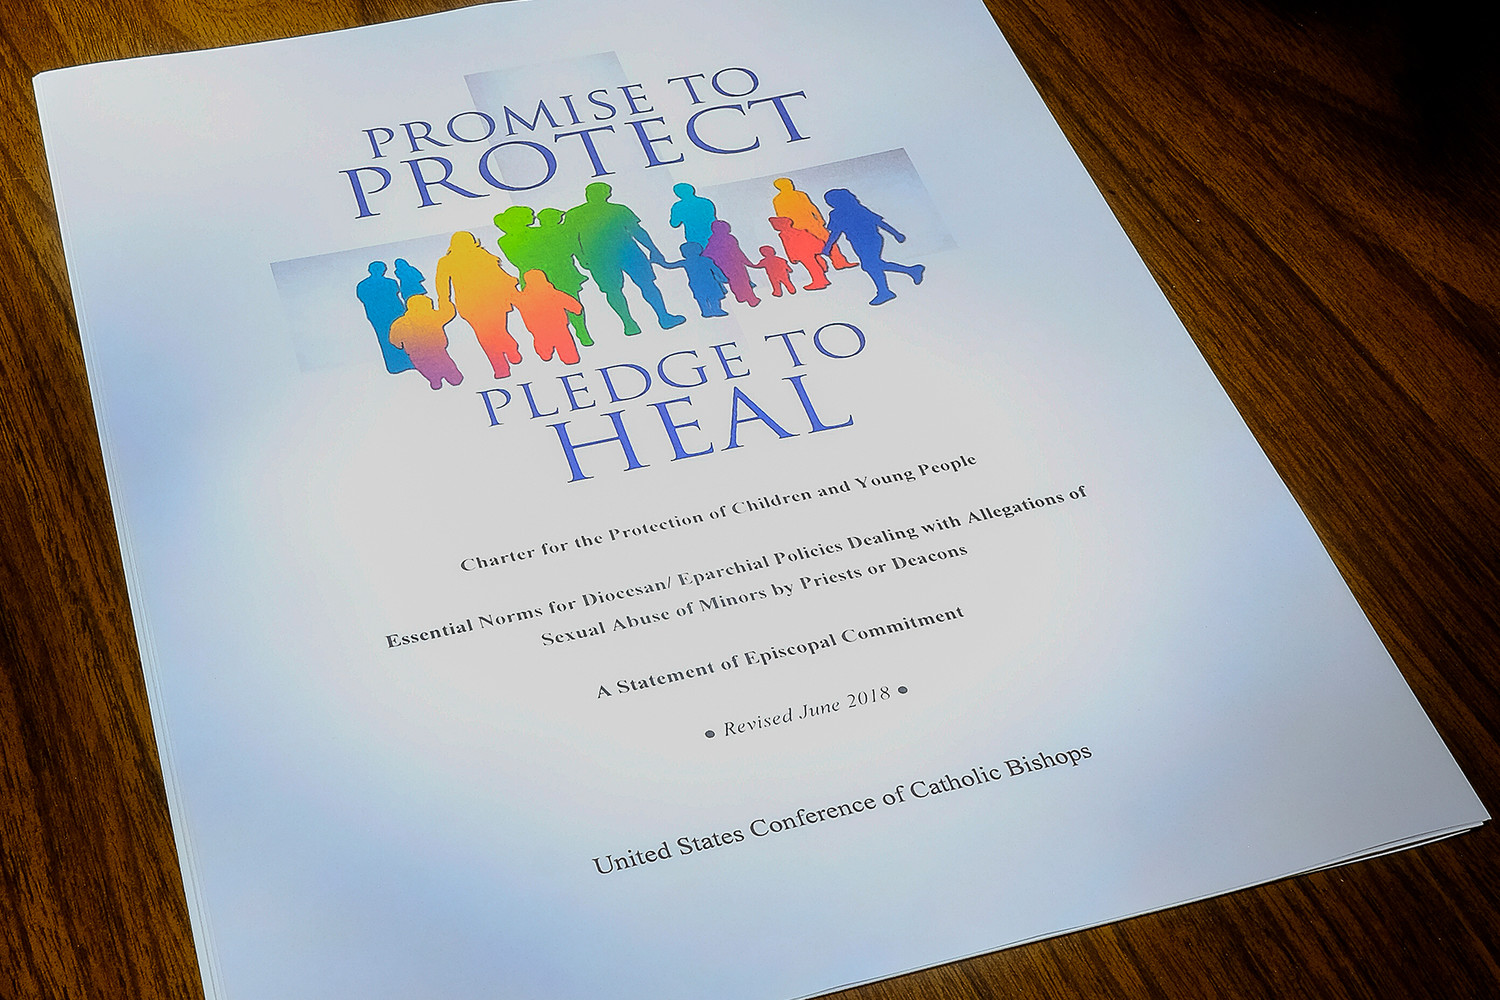 This is the cover of the USCCB “Charter for the Protection of Children and Young People.”